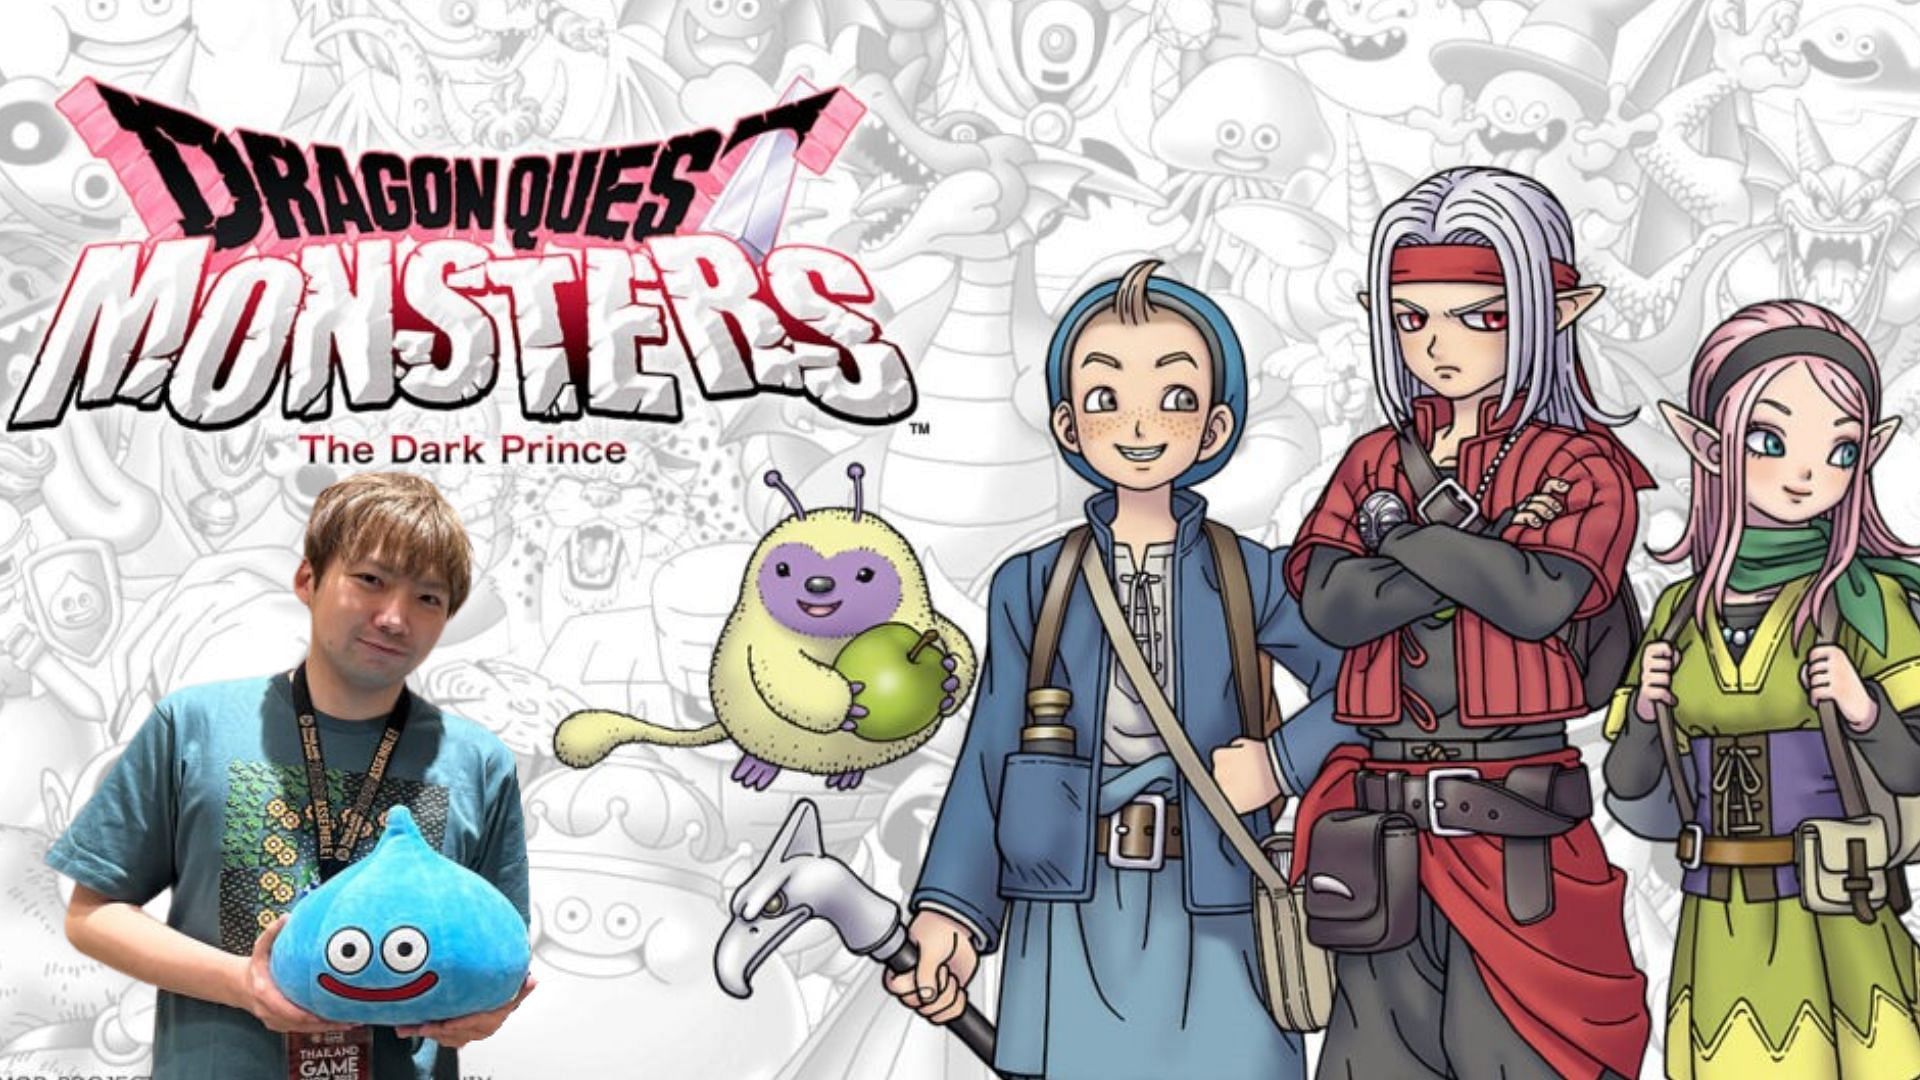 Dragon Quest Monsters: The Dark Prince is going to be a blast.